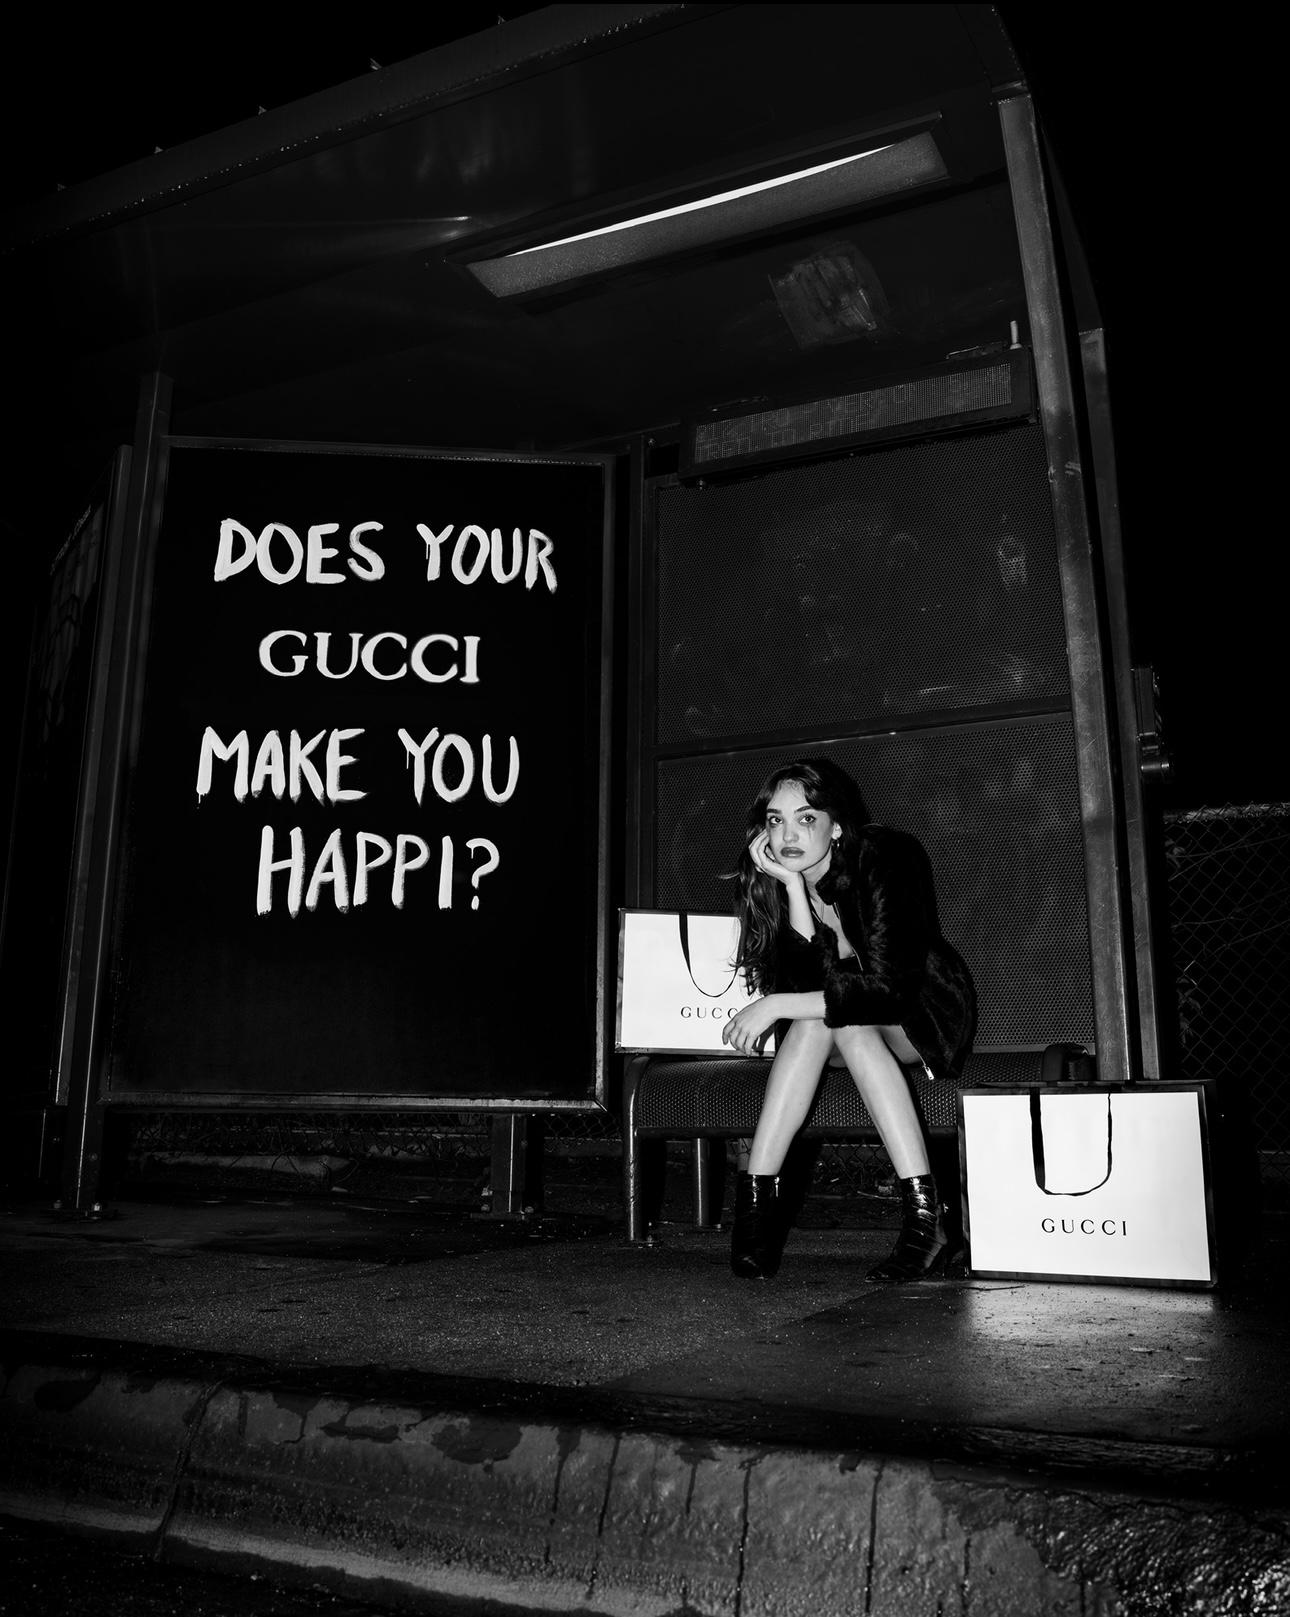 "Does your Gucci Make You Happi?" Photography 20x16in Ed. 3/15 by Brendan North

From “Painted Poetry” series:
“Painted Poetry” is a collection of 40 photographs created over 4 years and was my first step into conceptual photography.
They say a